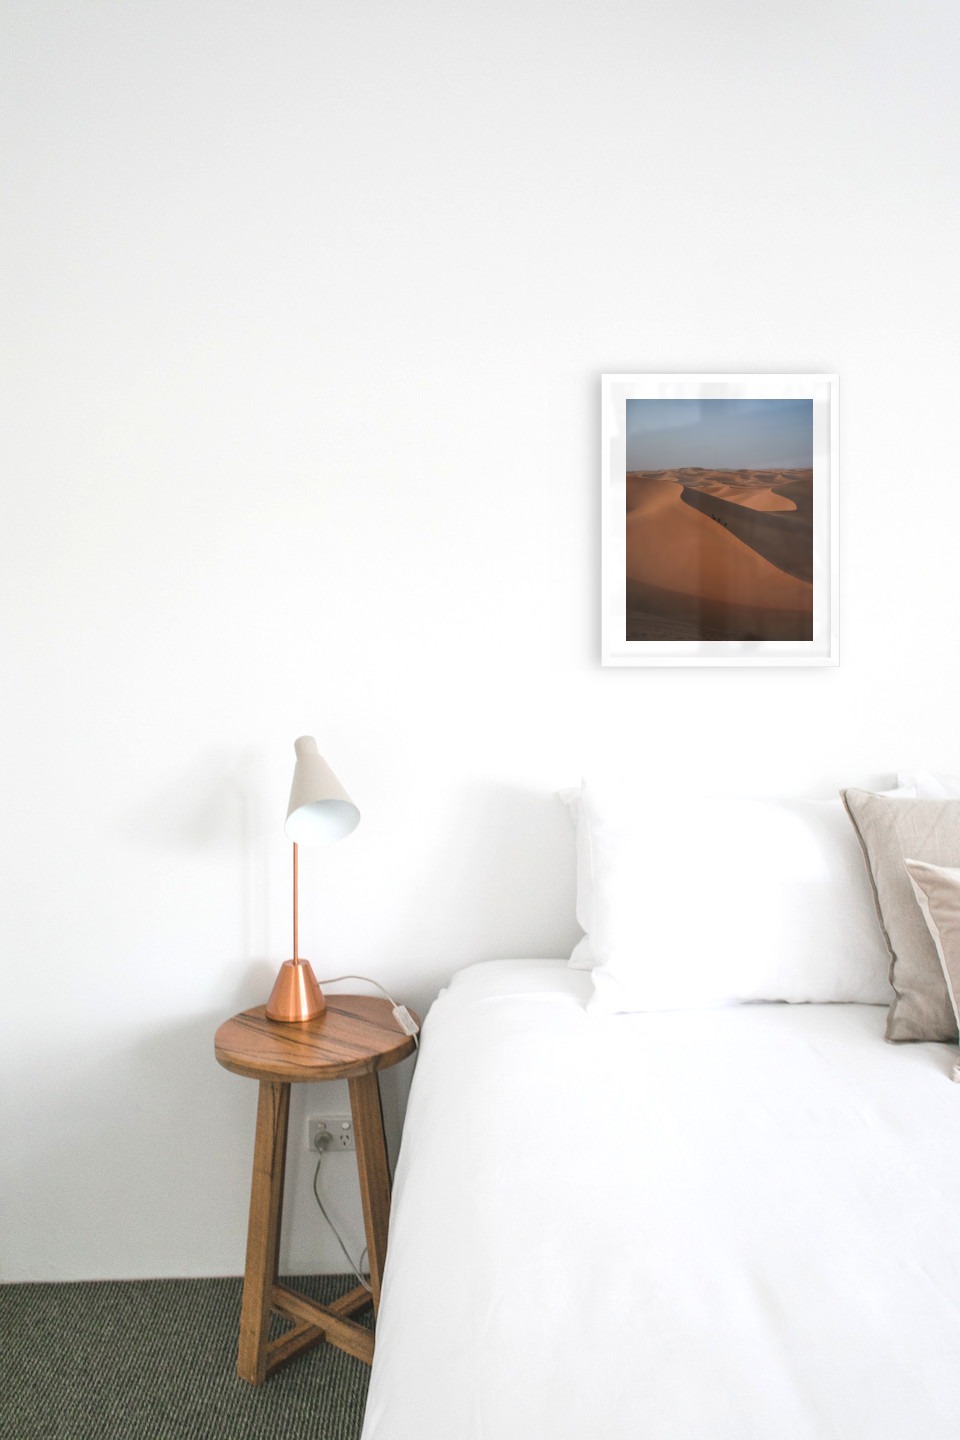 Gallery wall with picture frame in white in size 40x50 with print "Desert"